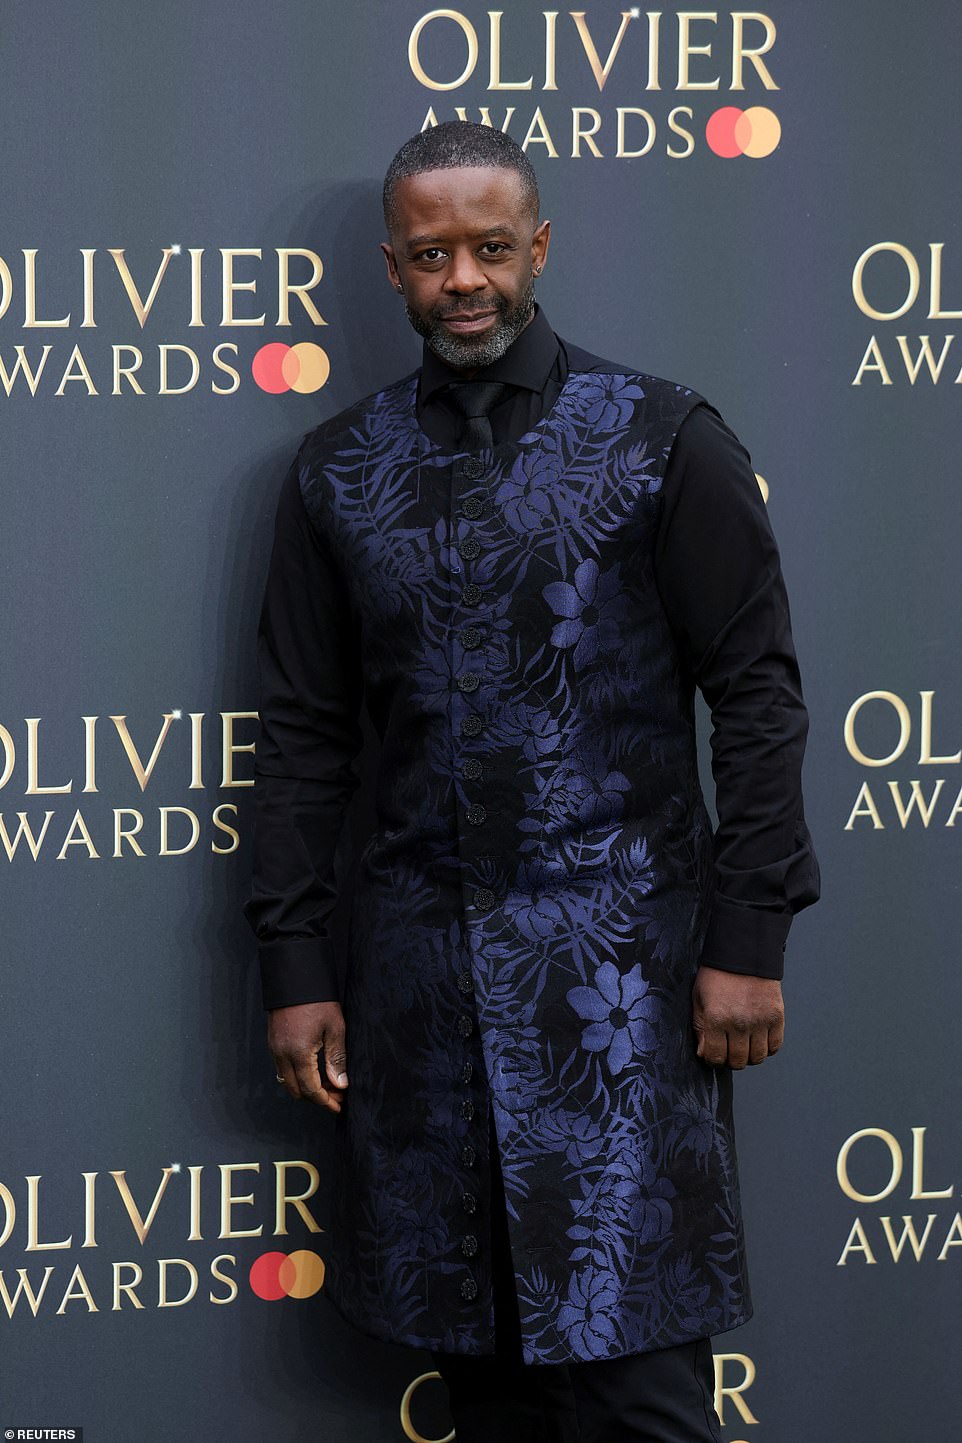 Adrian Lester looked sharp in a black shirt and tie, with a button down tunic layered over the top, embroidered in a blue floral design